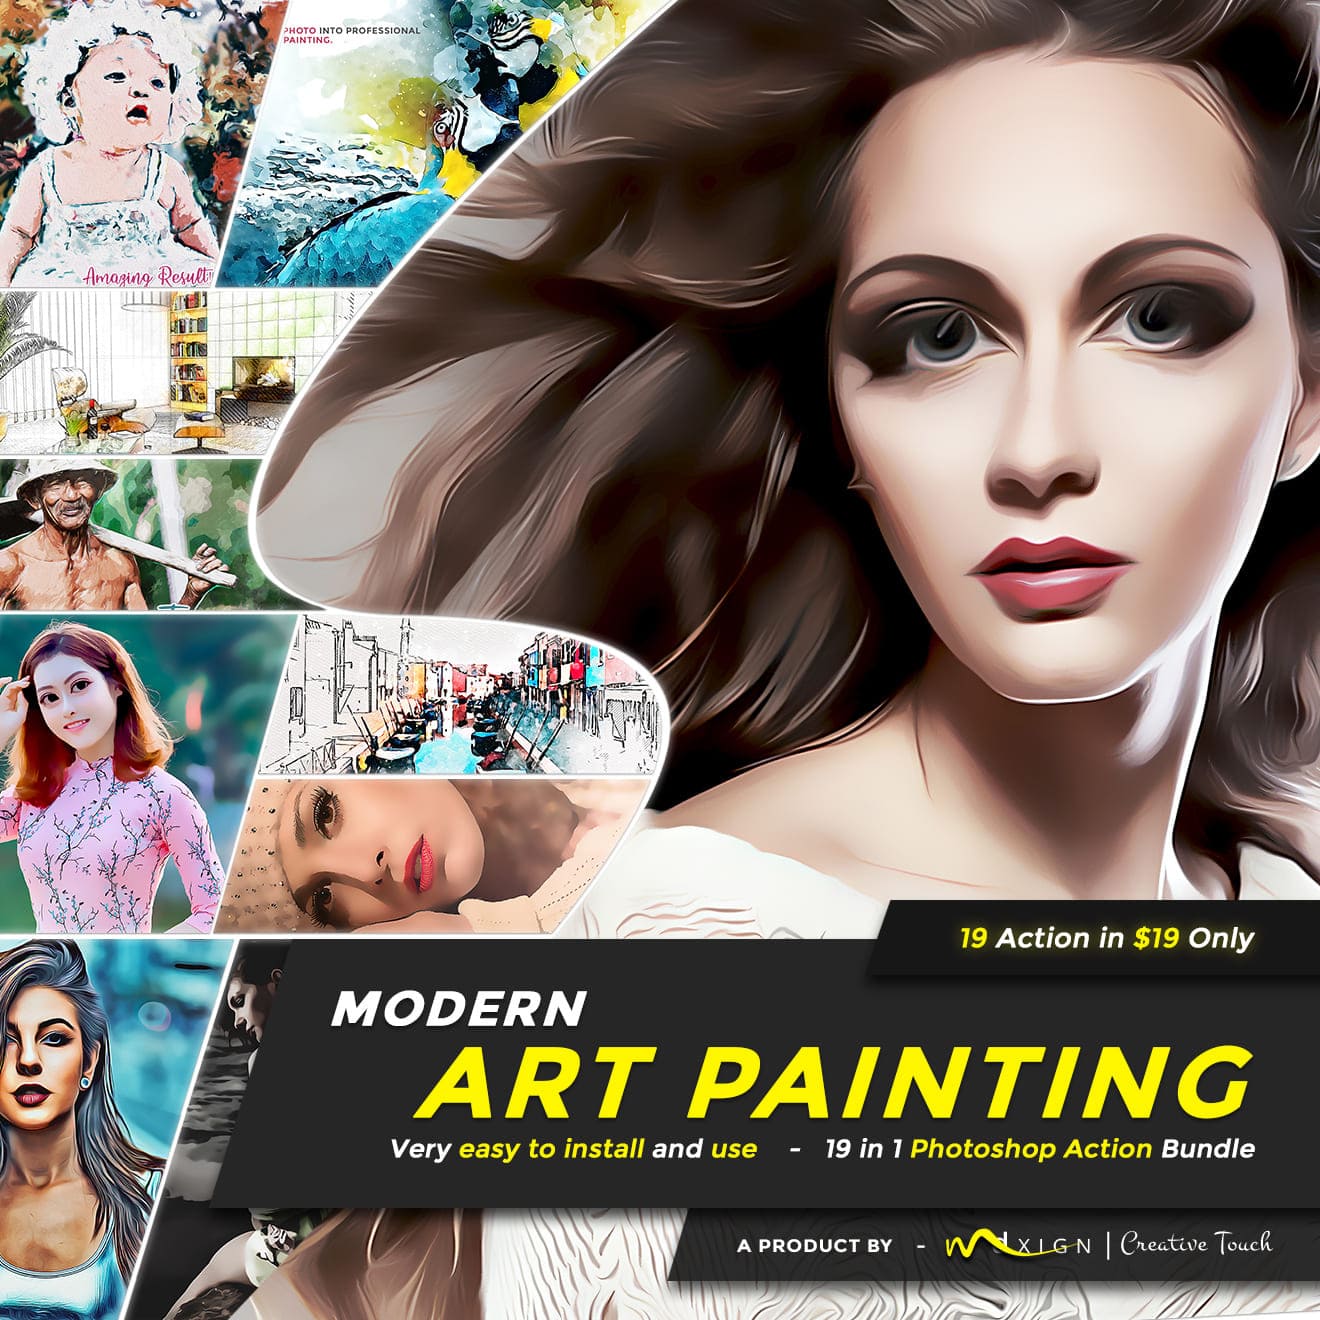 Modern Art Painting - 19 in 1 Photoshop Action Bundle.